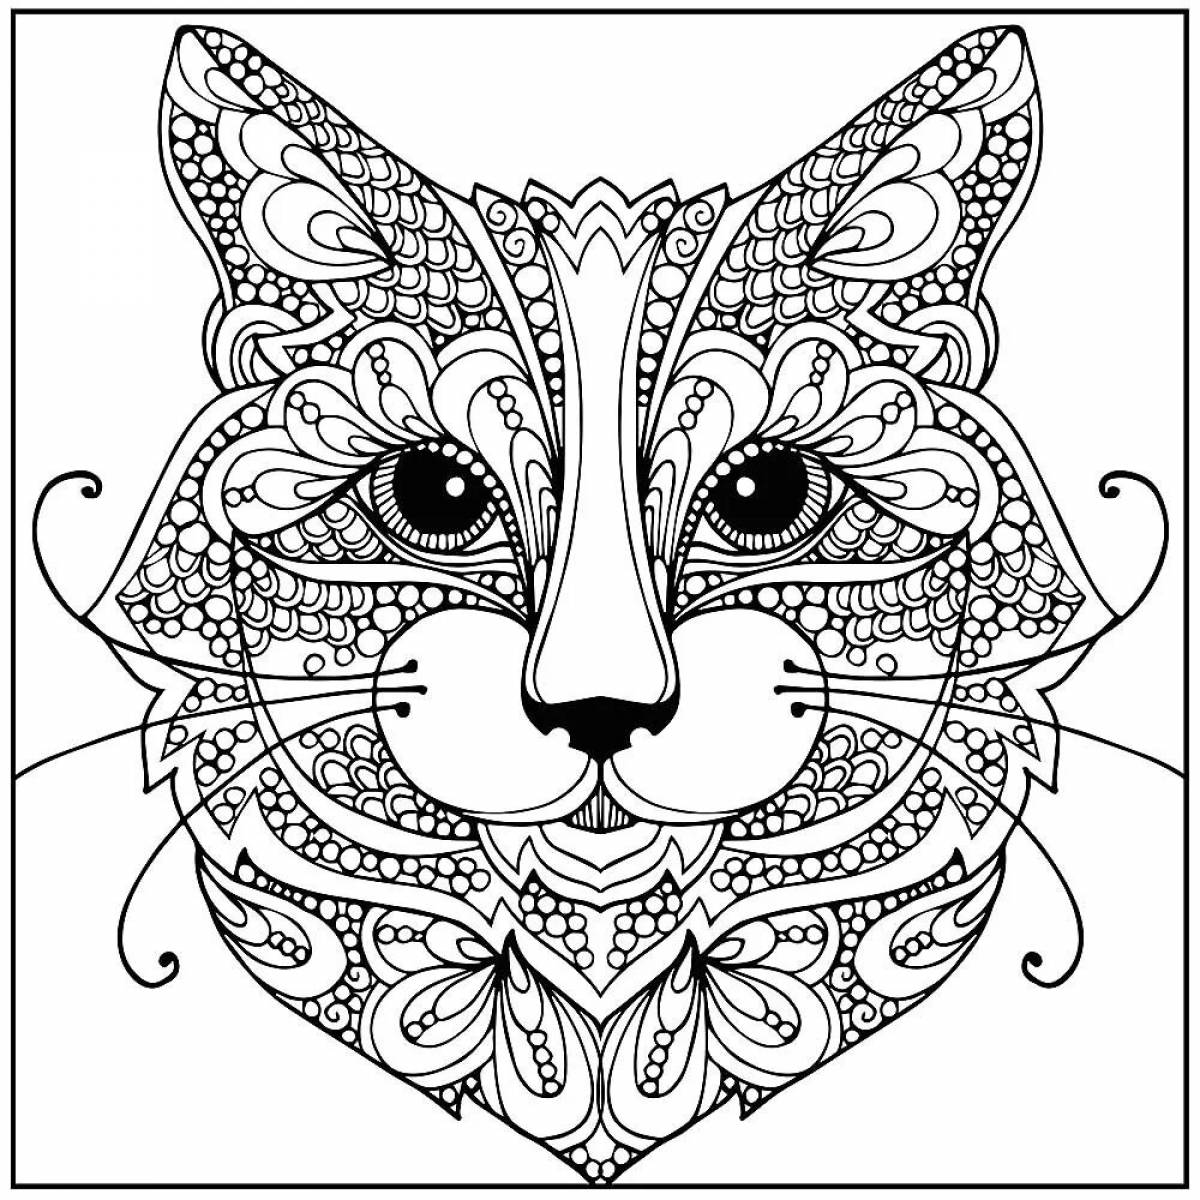 Relaxing anti-stress animal coloring book for kids